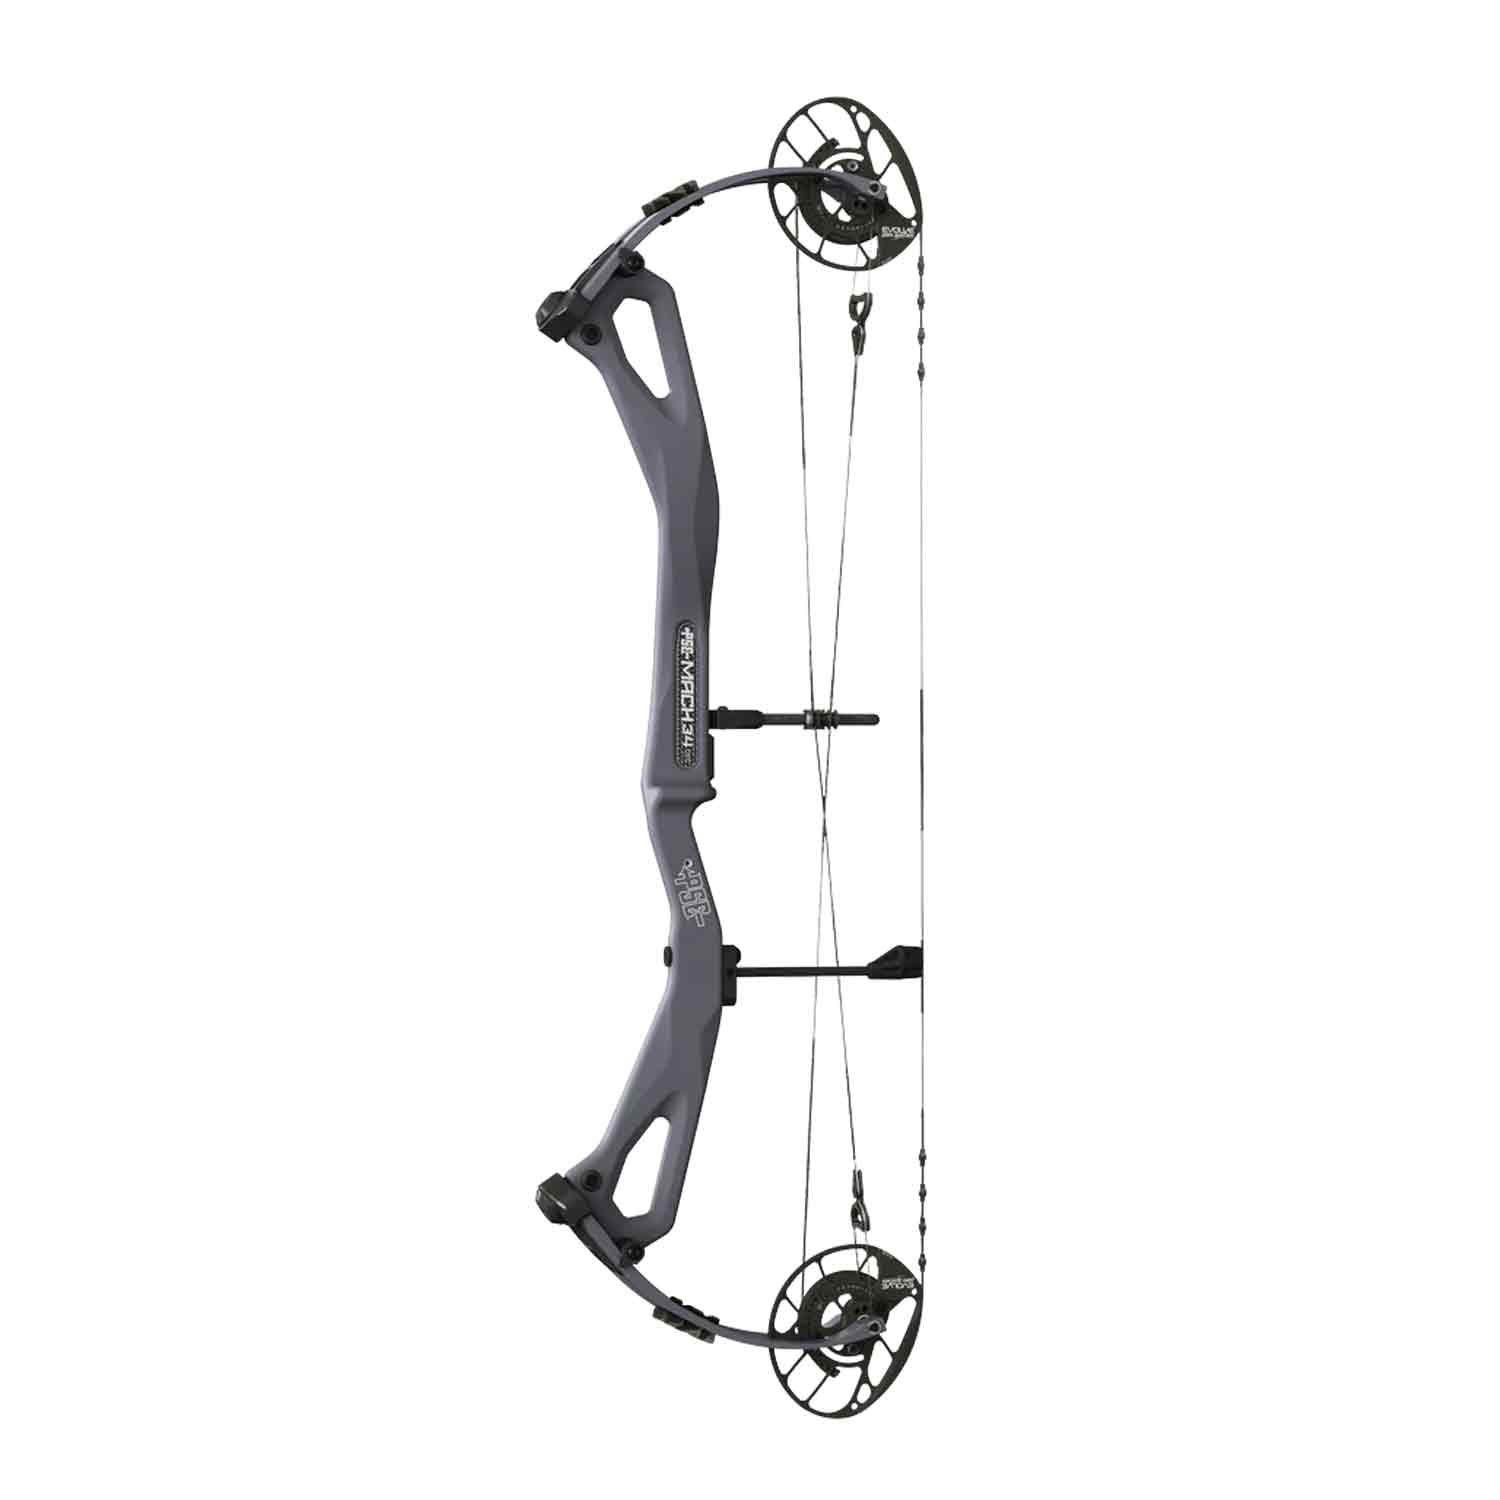 PSE Mach 34 EC2 Carbon Compound Hunting Bow